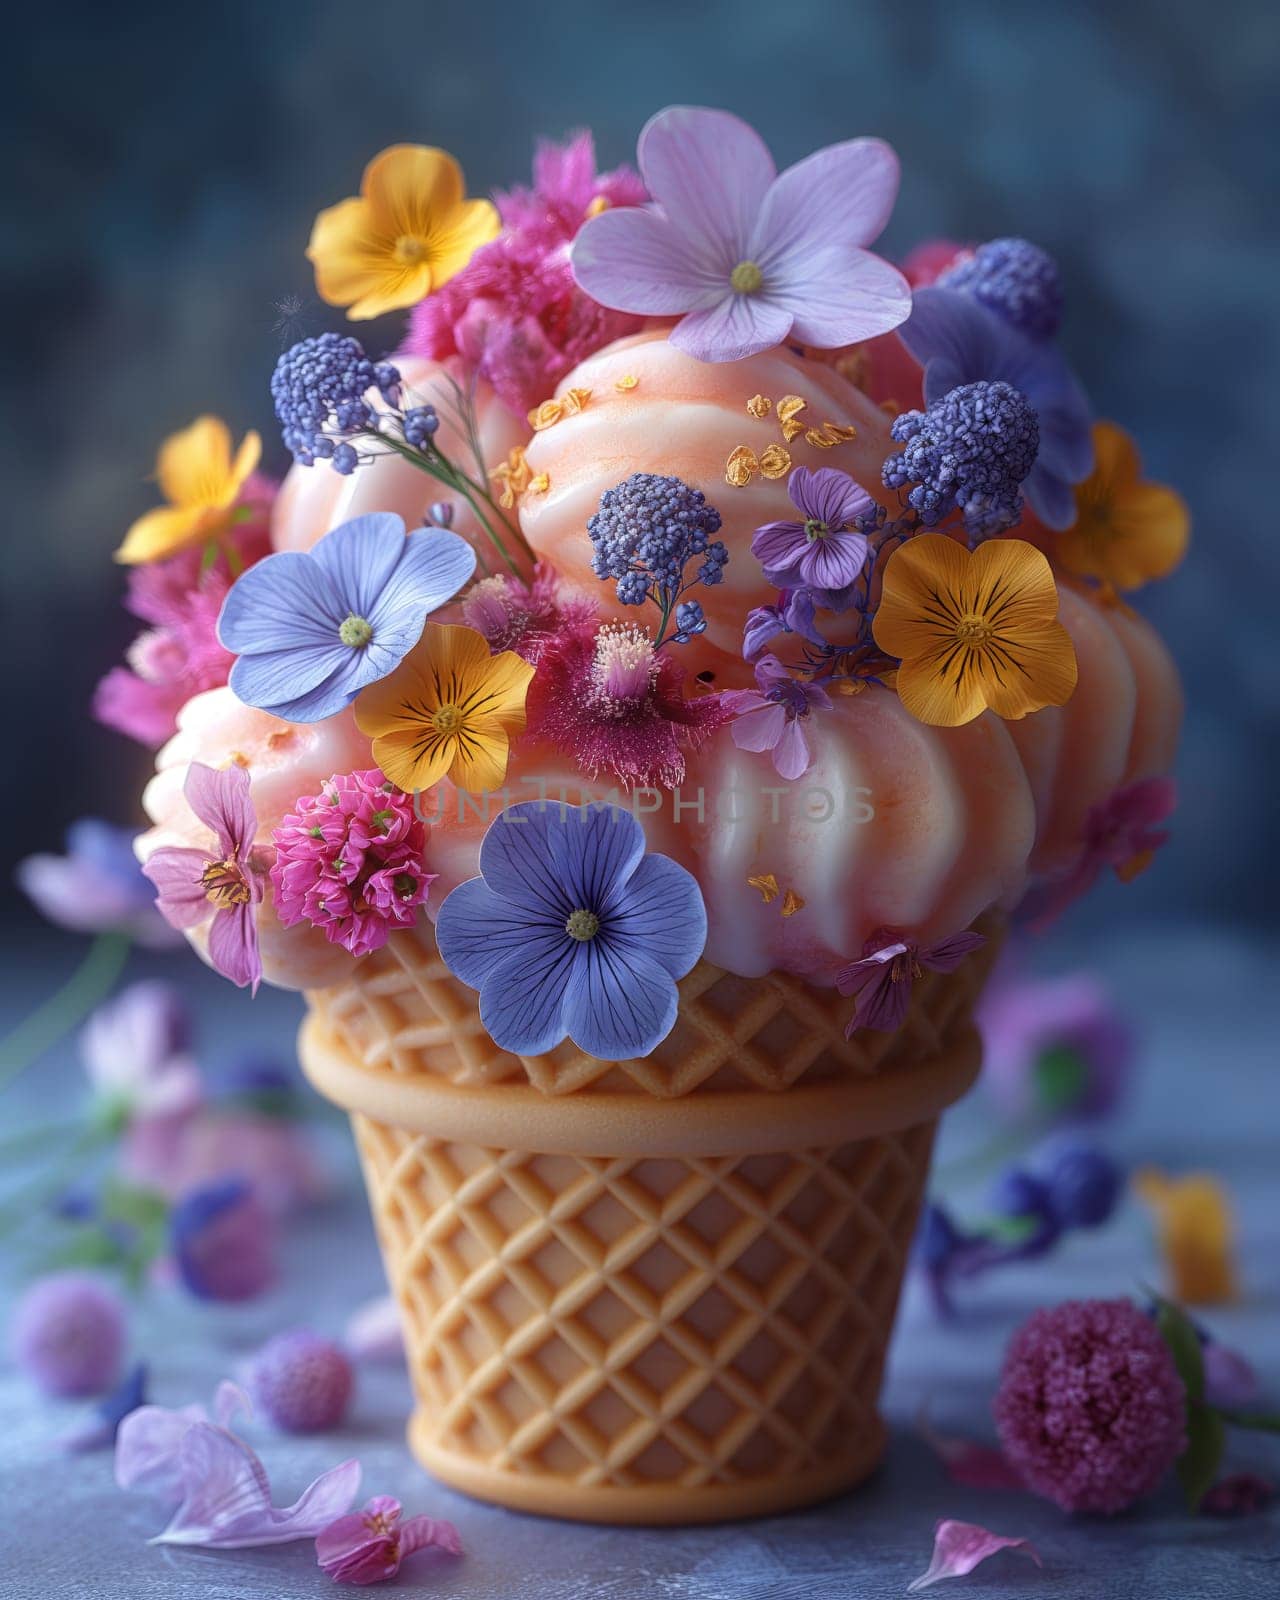 Flower ice cream in a waffle cup. by Fischeron